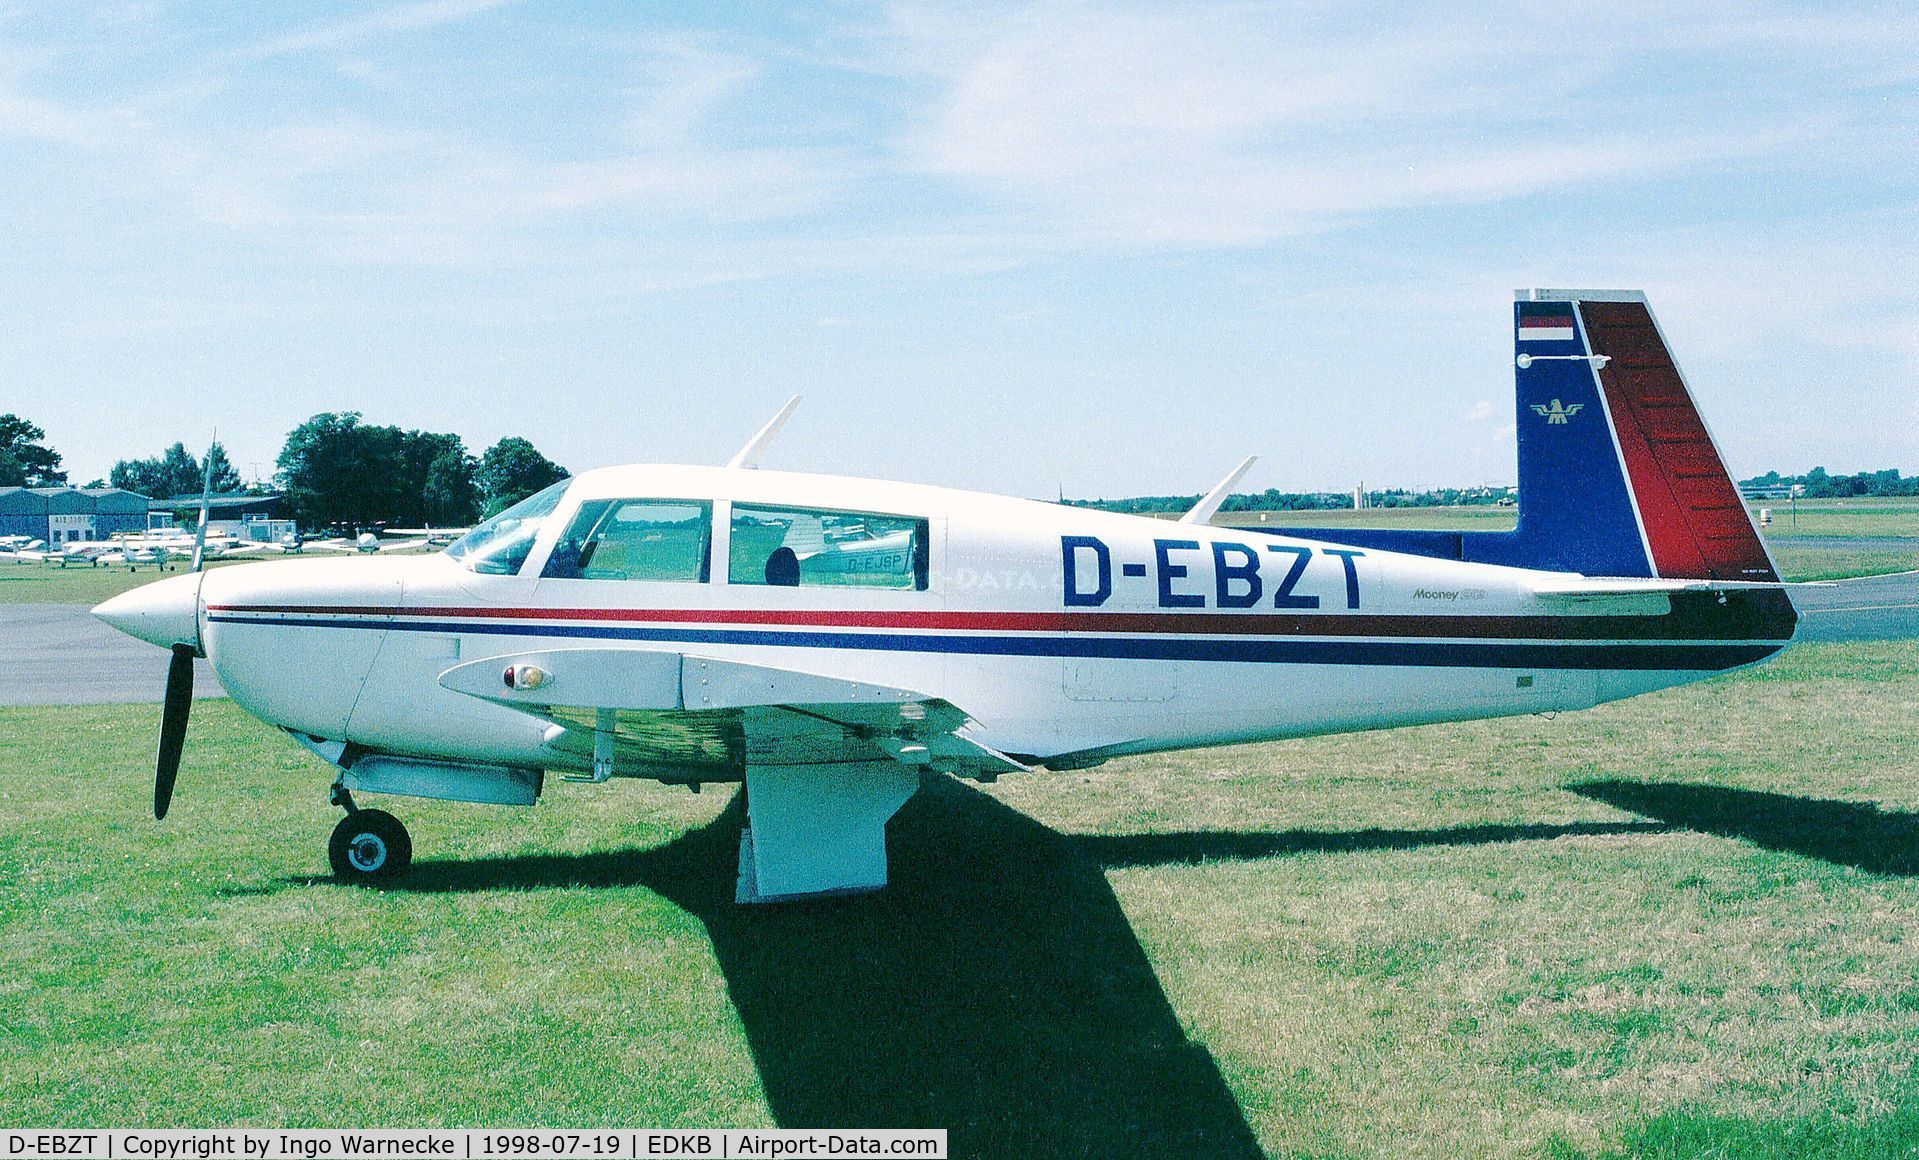 D-EBZT, 1979 Mooney M20J 201 C/N 24-0825, Mooney M20J Model 201 at Bonn-Hangelar airfield